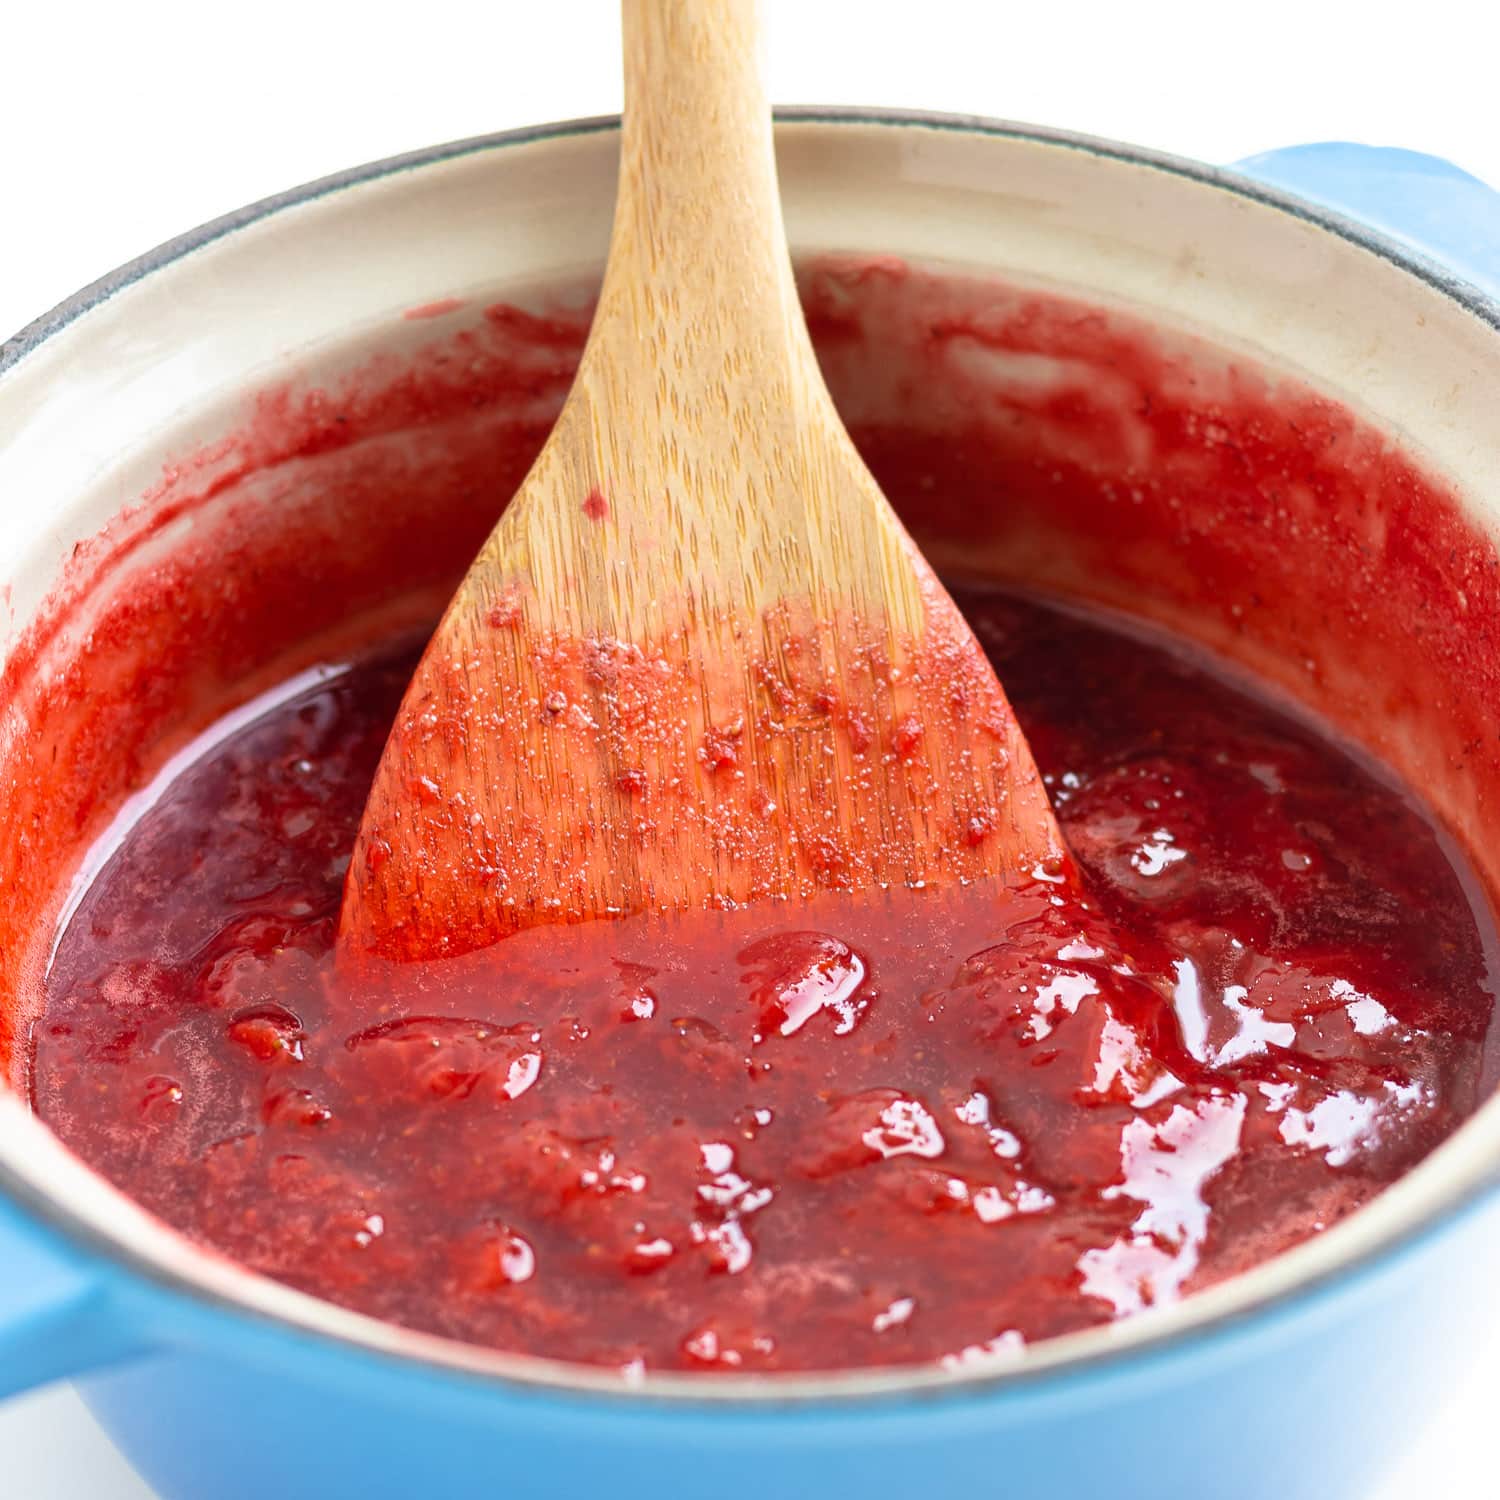 Wooden spoon stirring strawberry compote in saucepan.